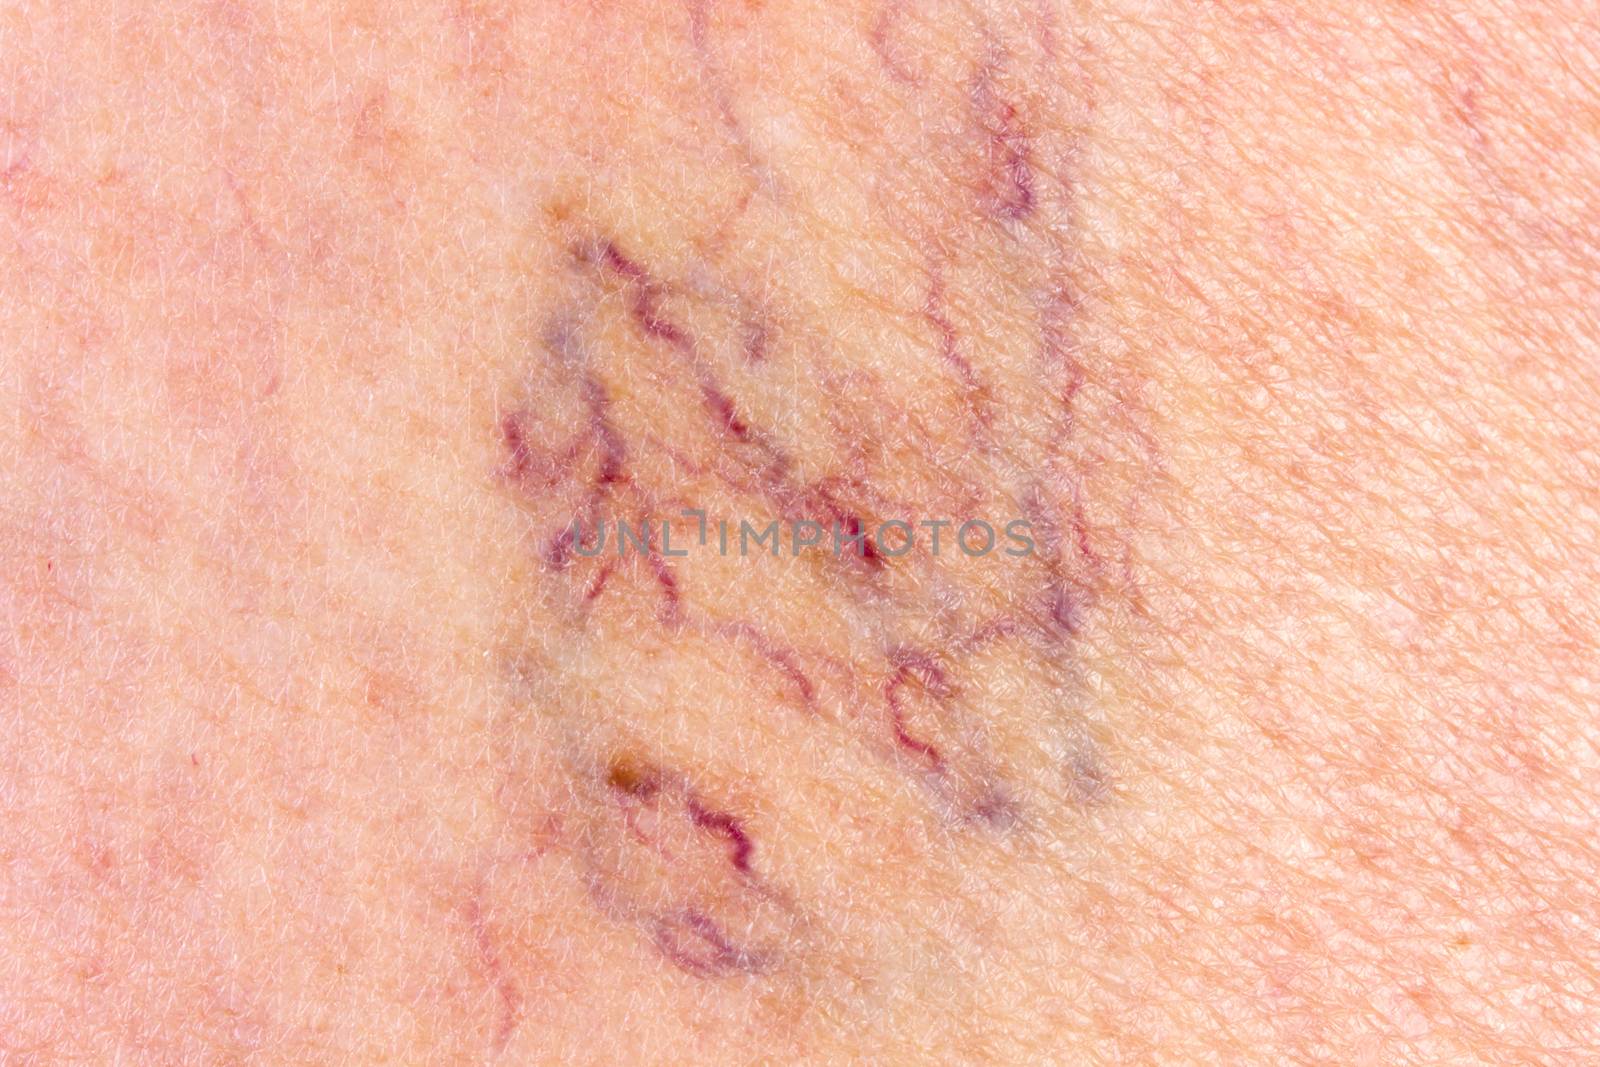 Close-up of leg with varicose veins by gwolters